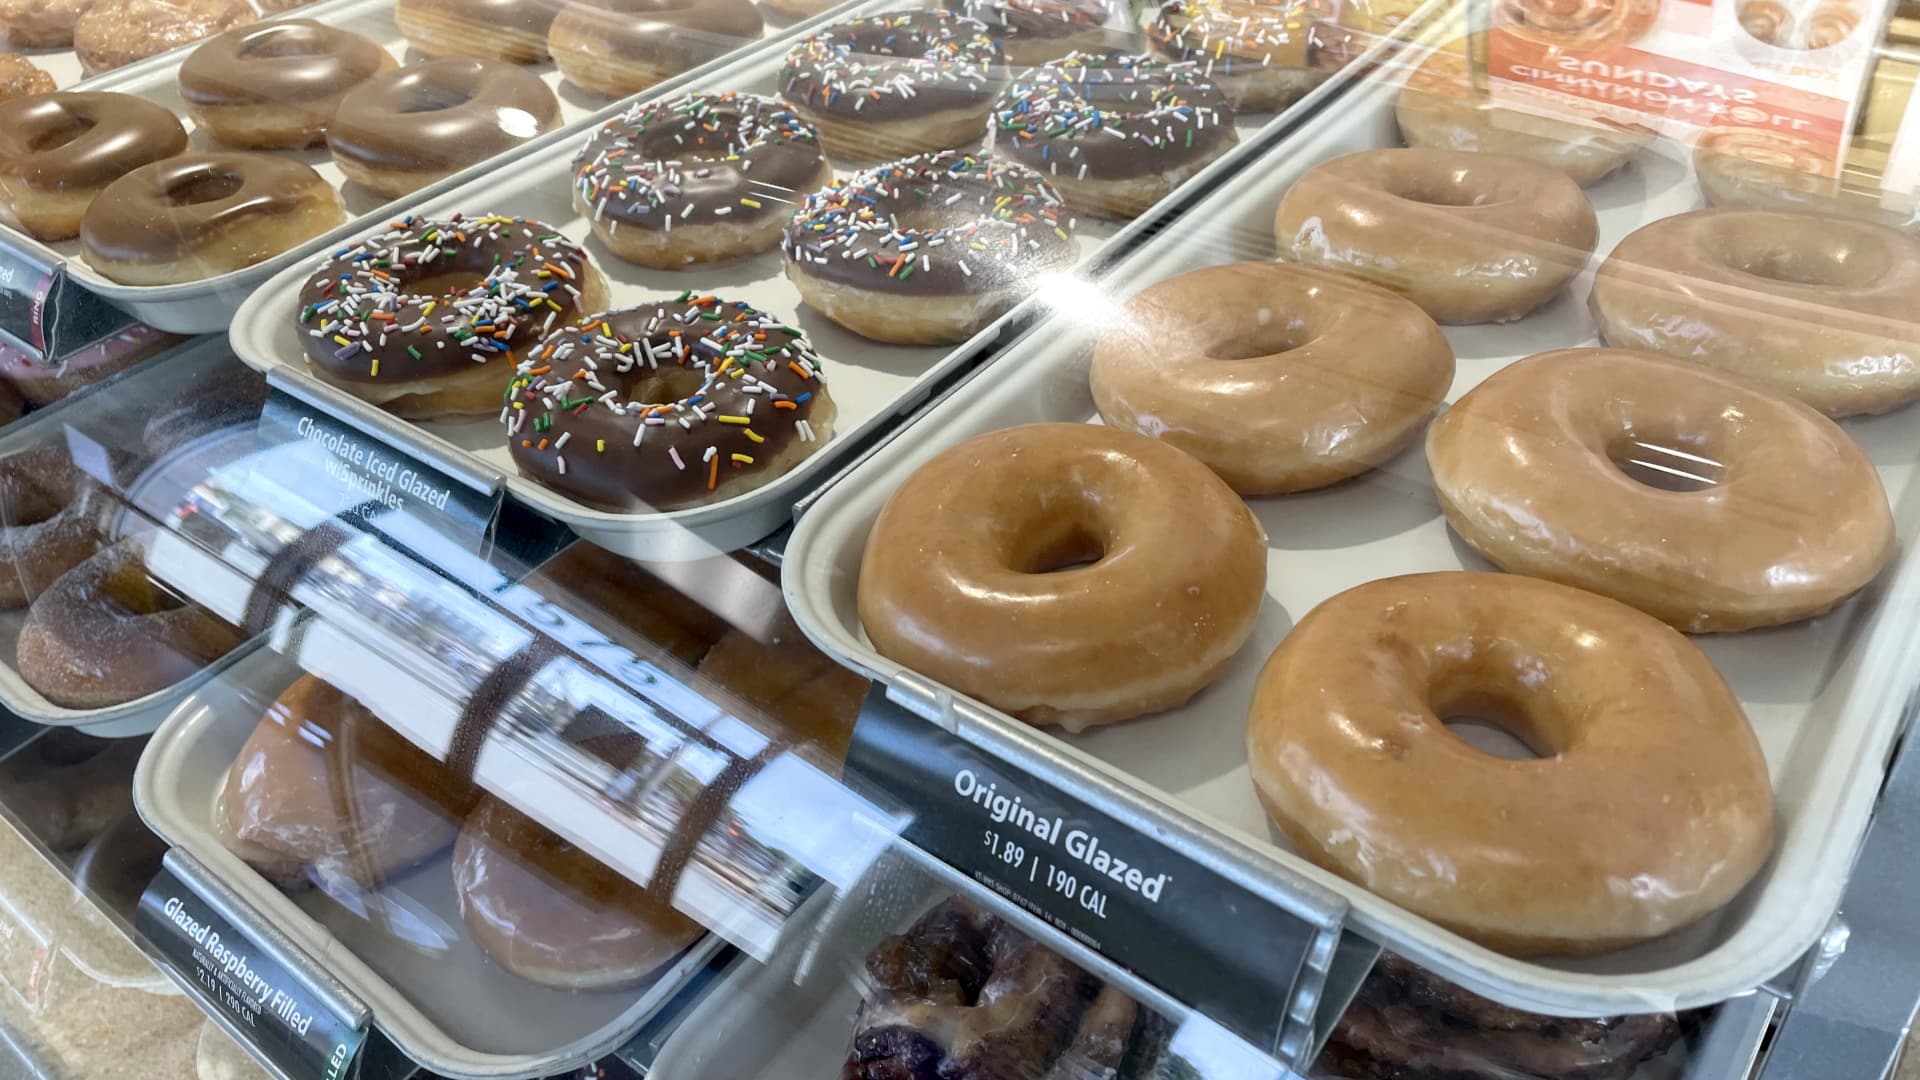 McDonald’s to sell Krispy Kreme doughnuts nationwide by end of 2026